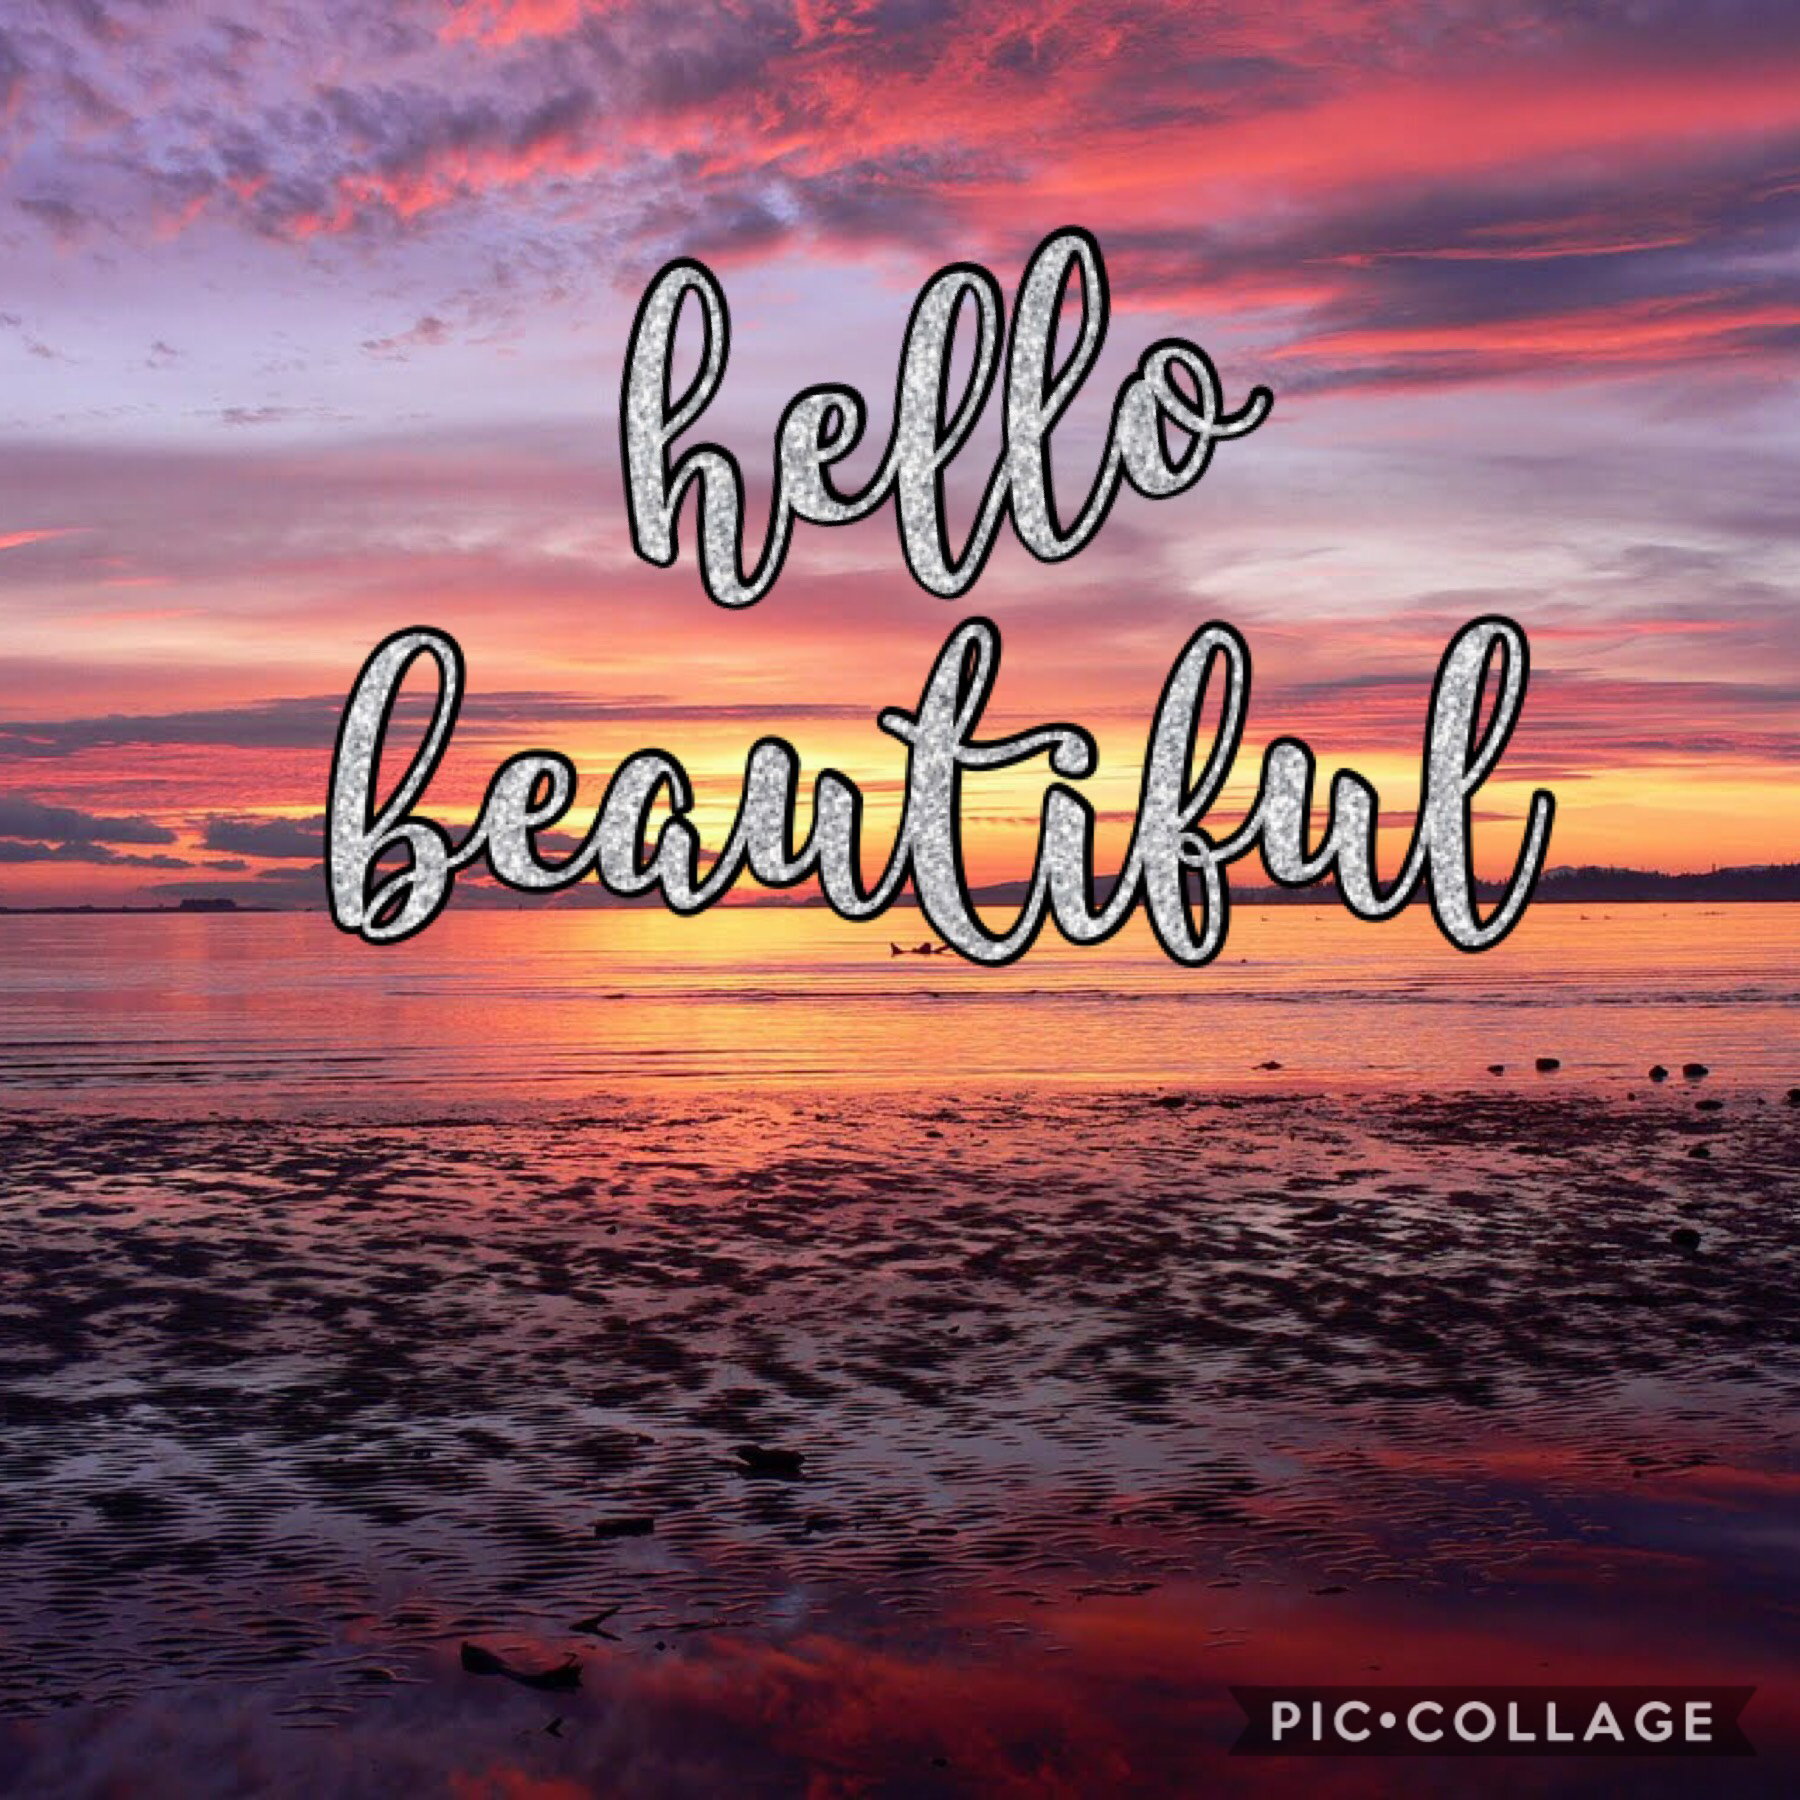 You are beautiful just the way you are!